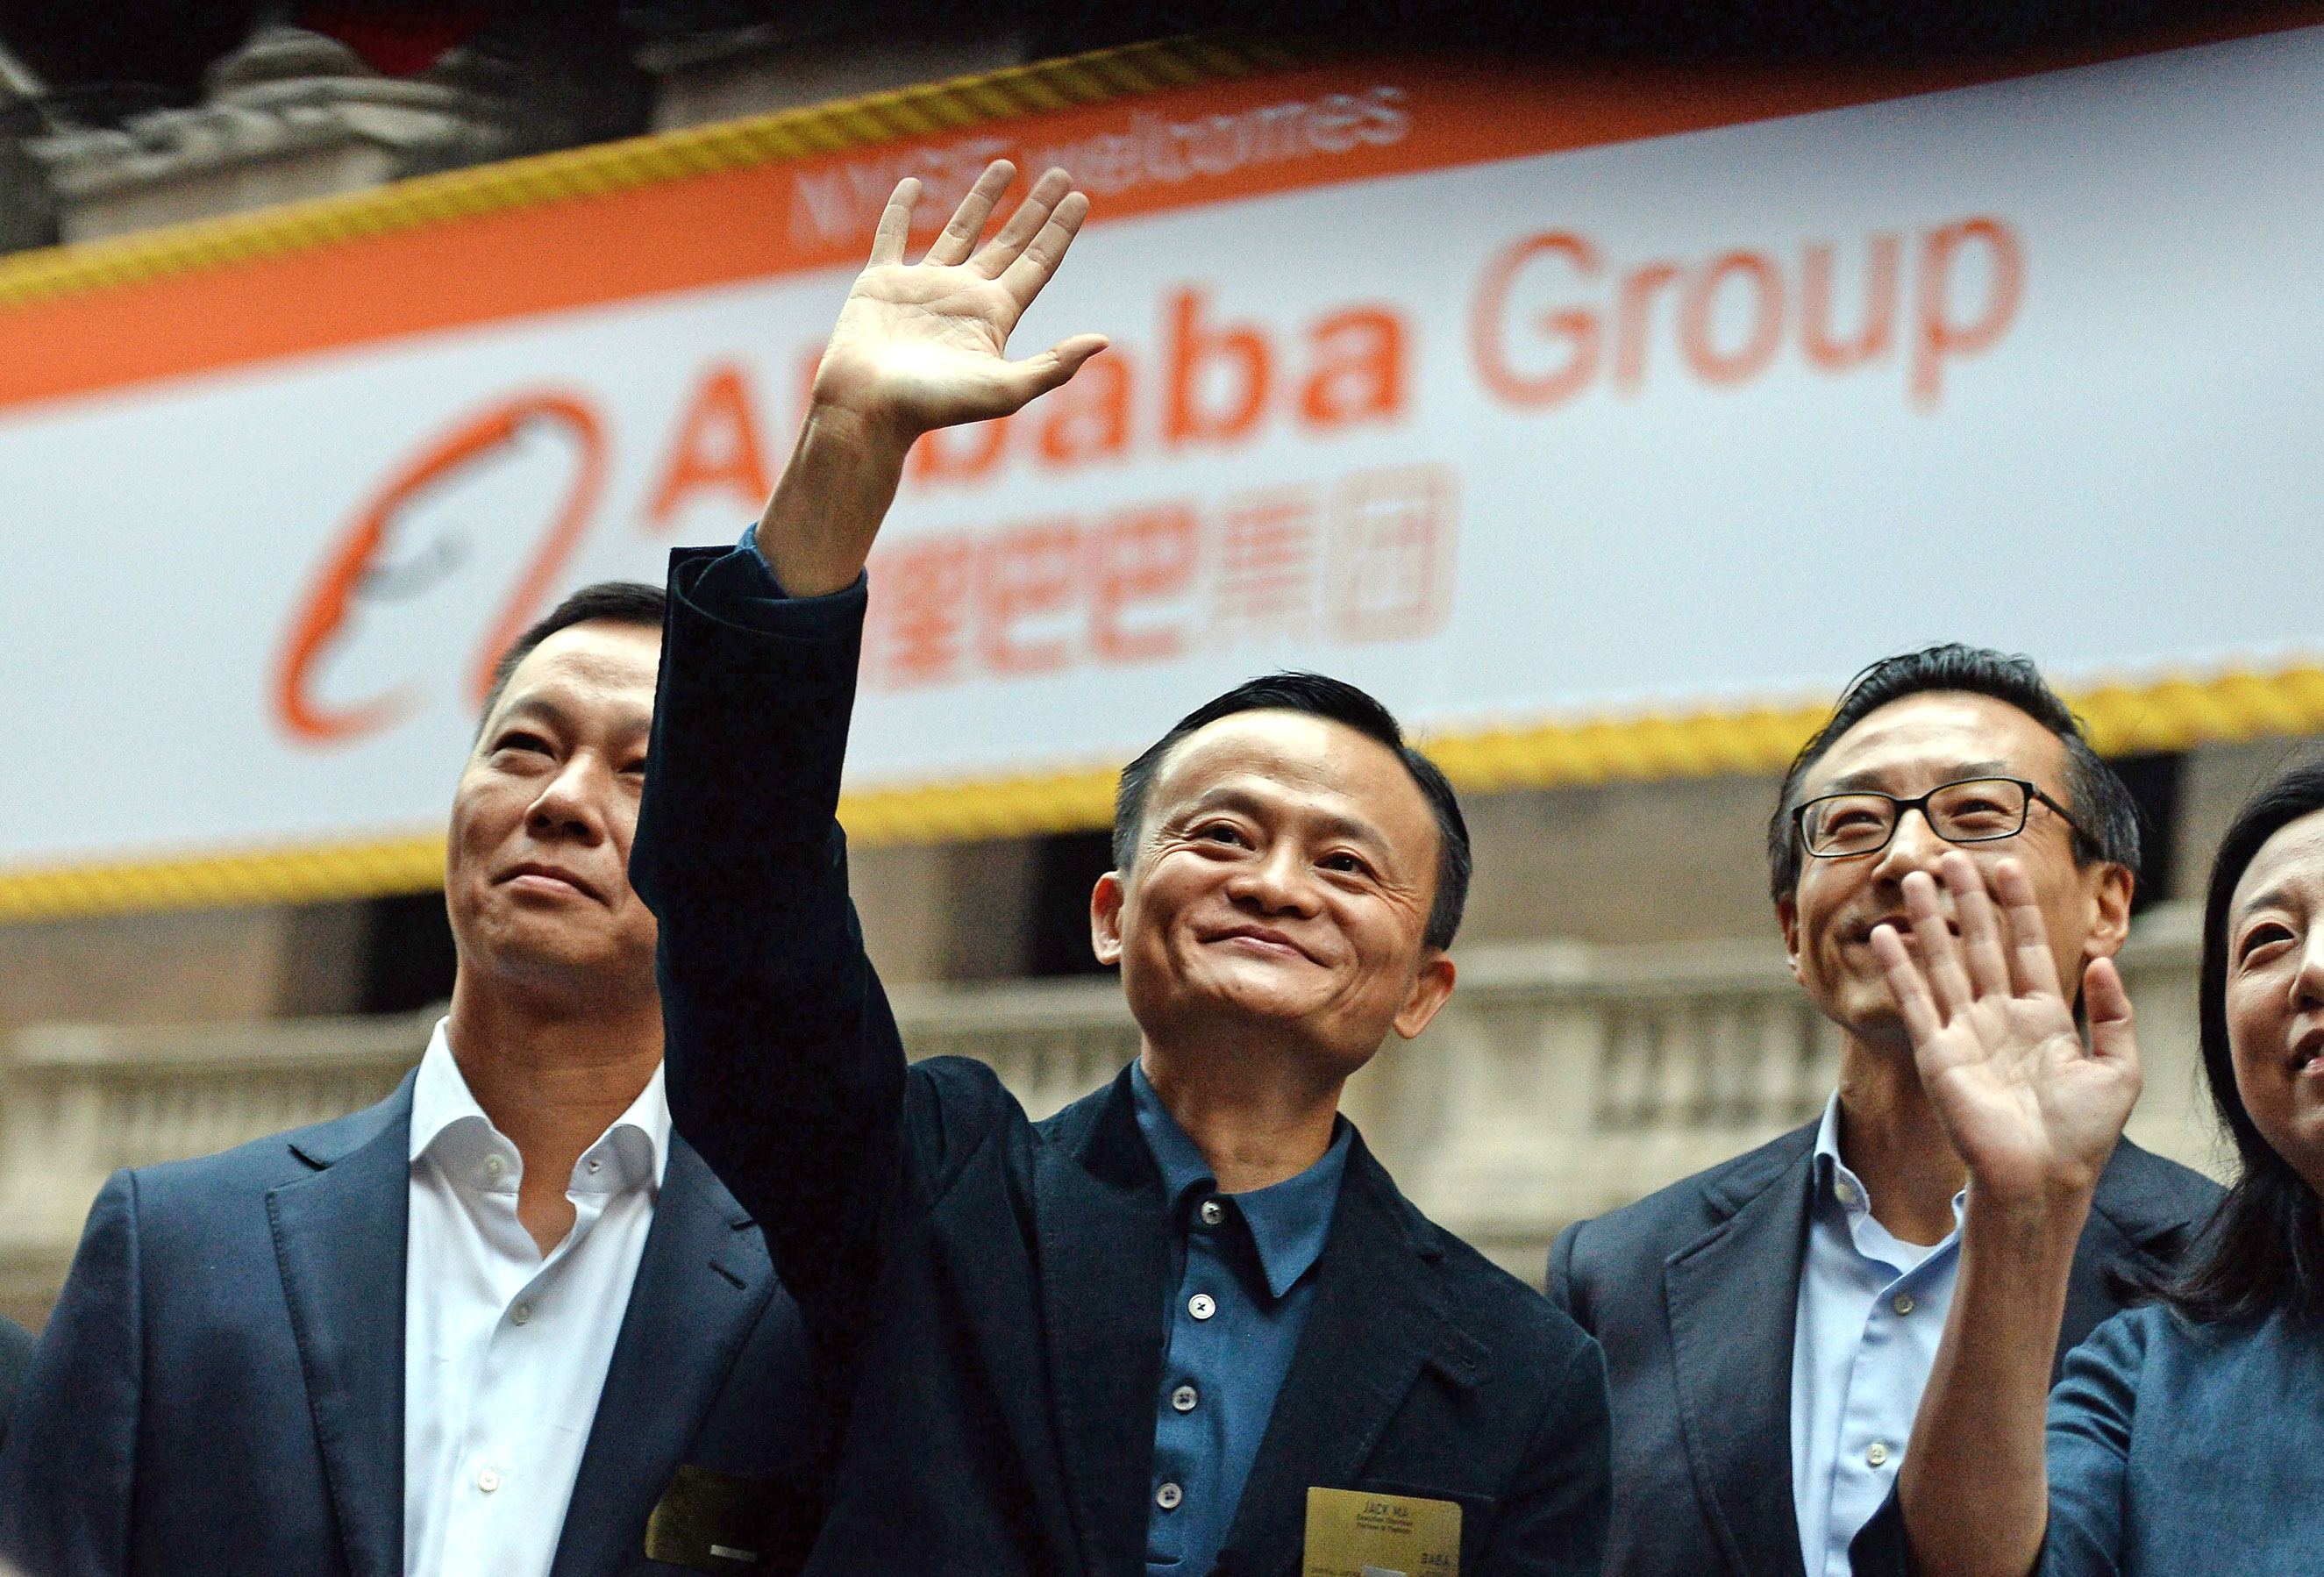 Chinese online retail giant Alibaba's executive chairman and founder Jack Ma (center) waves as he arrives at the New York Stock Exchange in New York City on Sept. 19, 2014. (Jewel Samad—AFP/Getty Images)